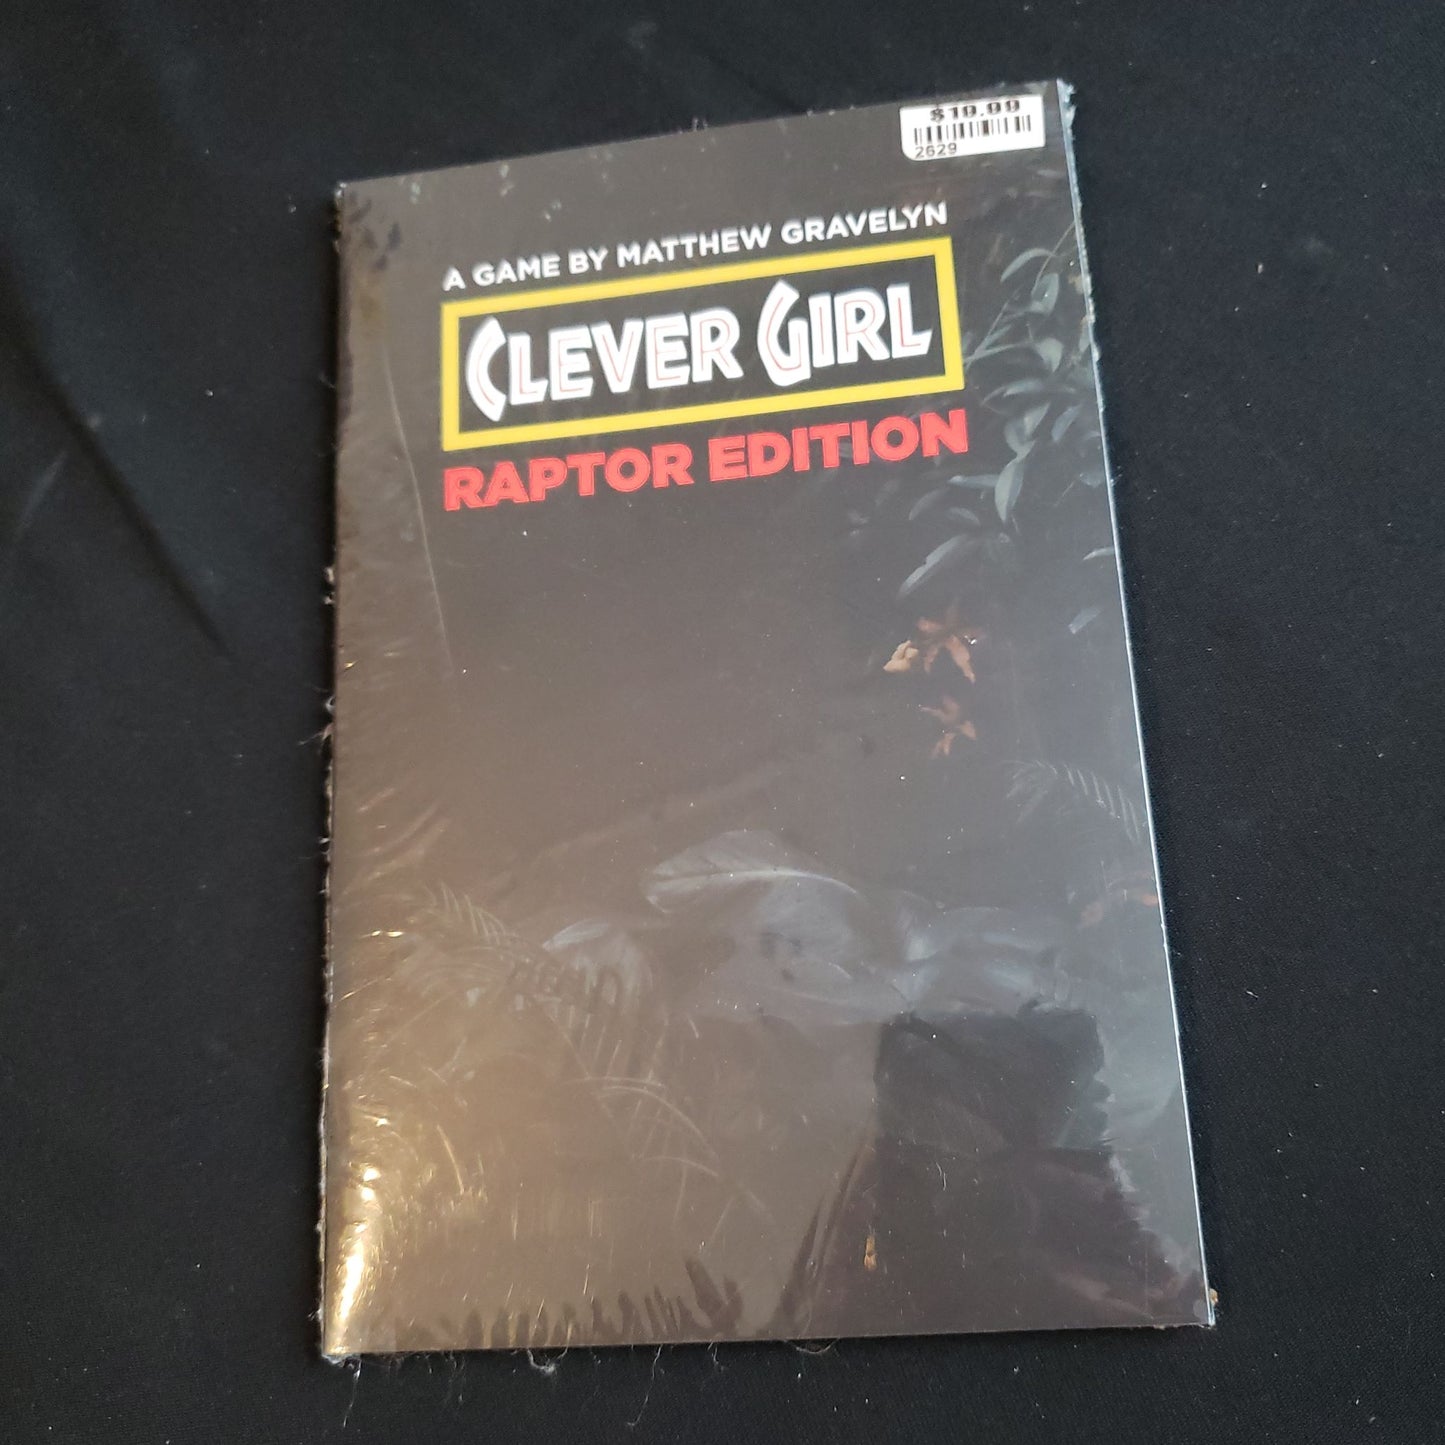 Image shows the front cover of the Clever Girl roleplaying game book